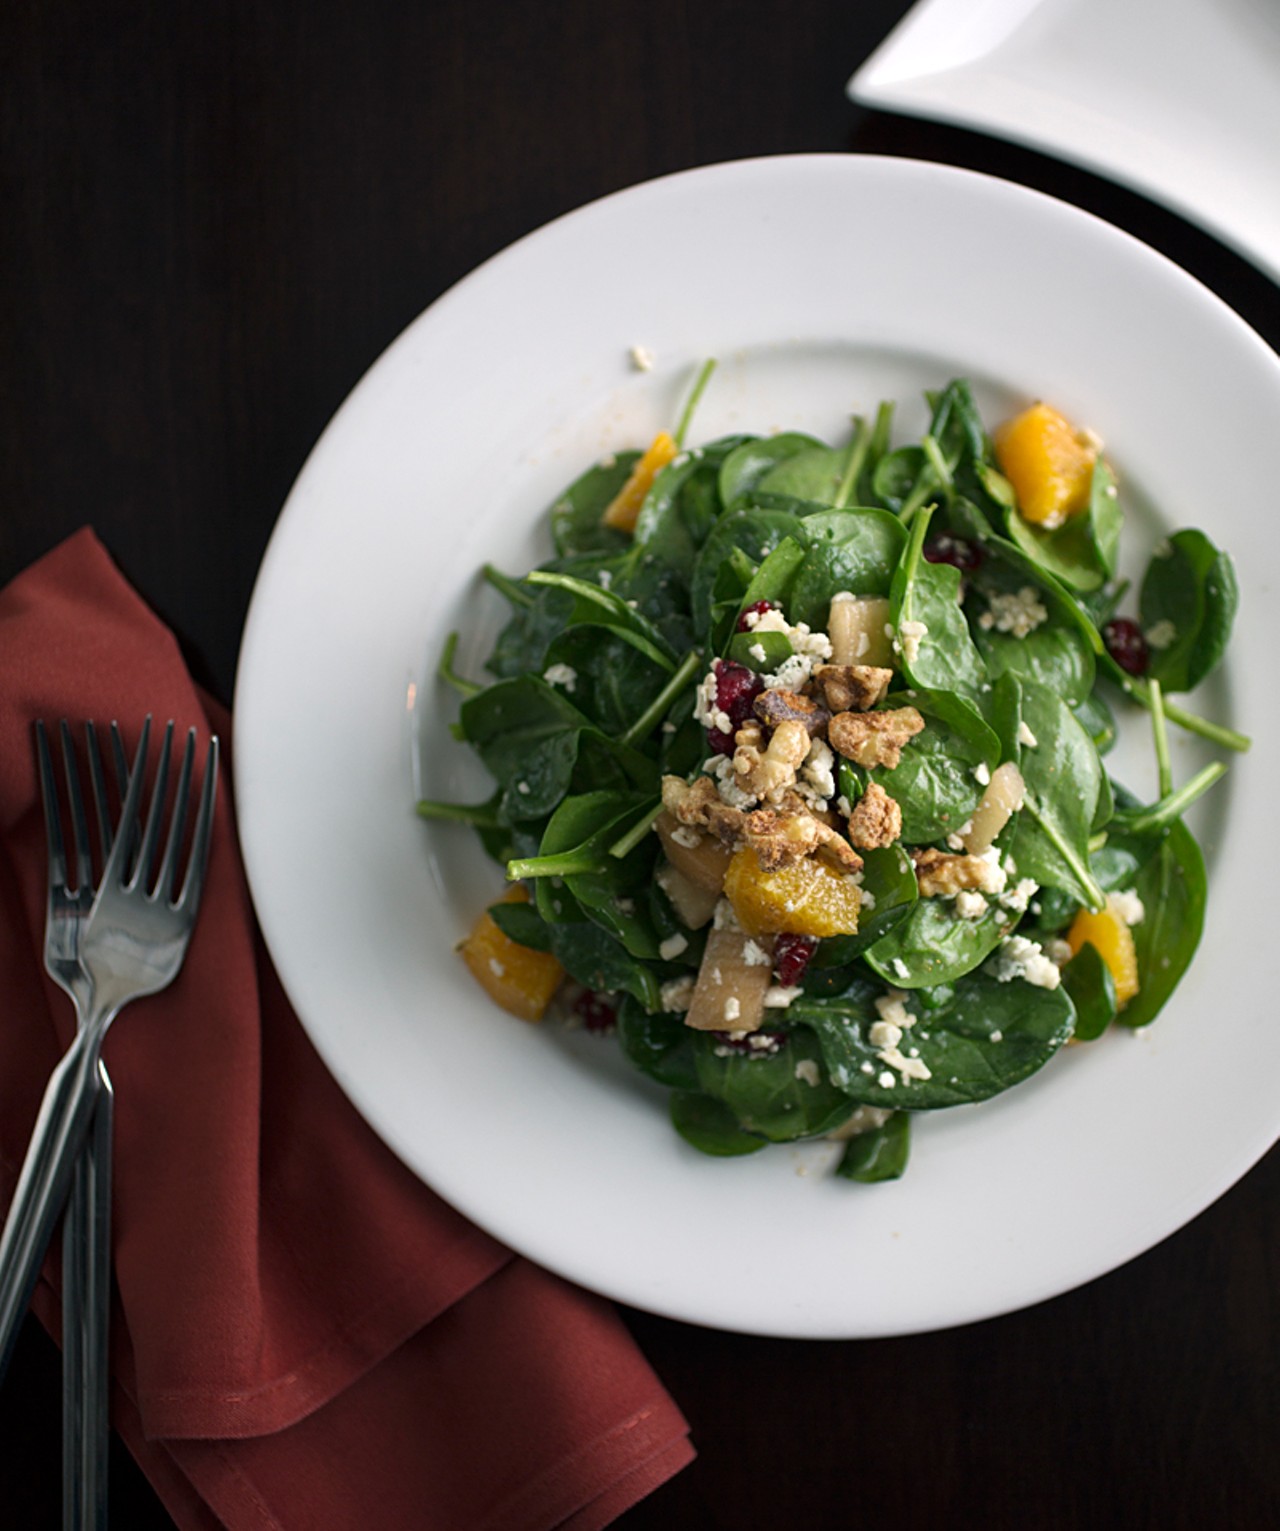 Spinach Salad with candied walnuts, pear, cranberries, gorgonzola and pomegranate vinaigrette.